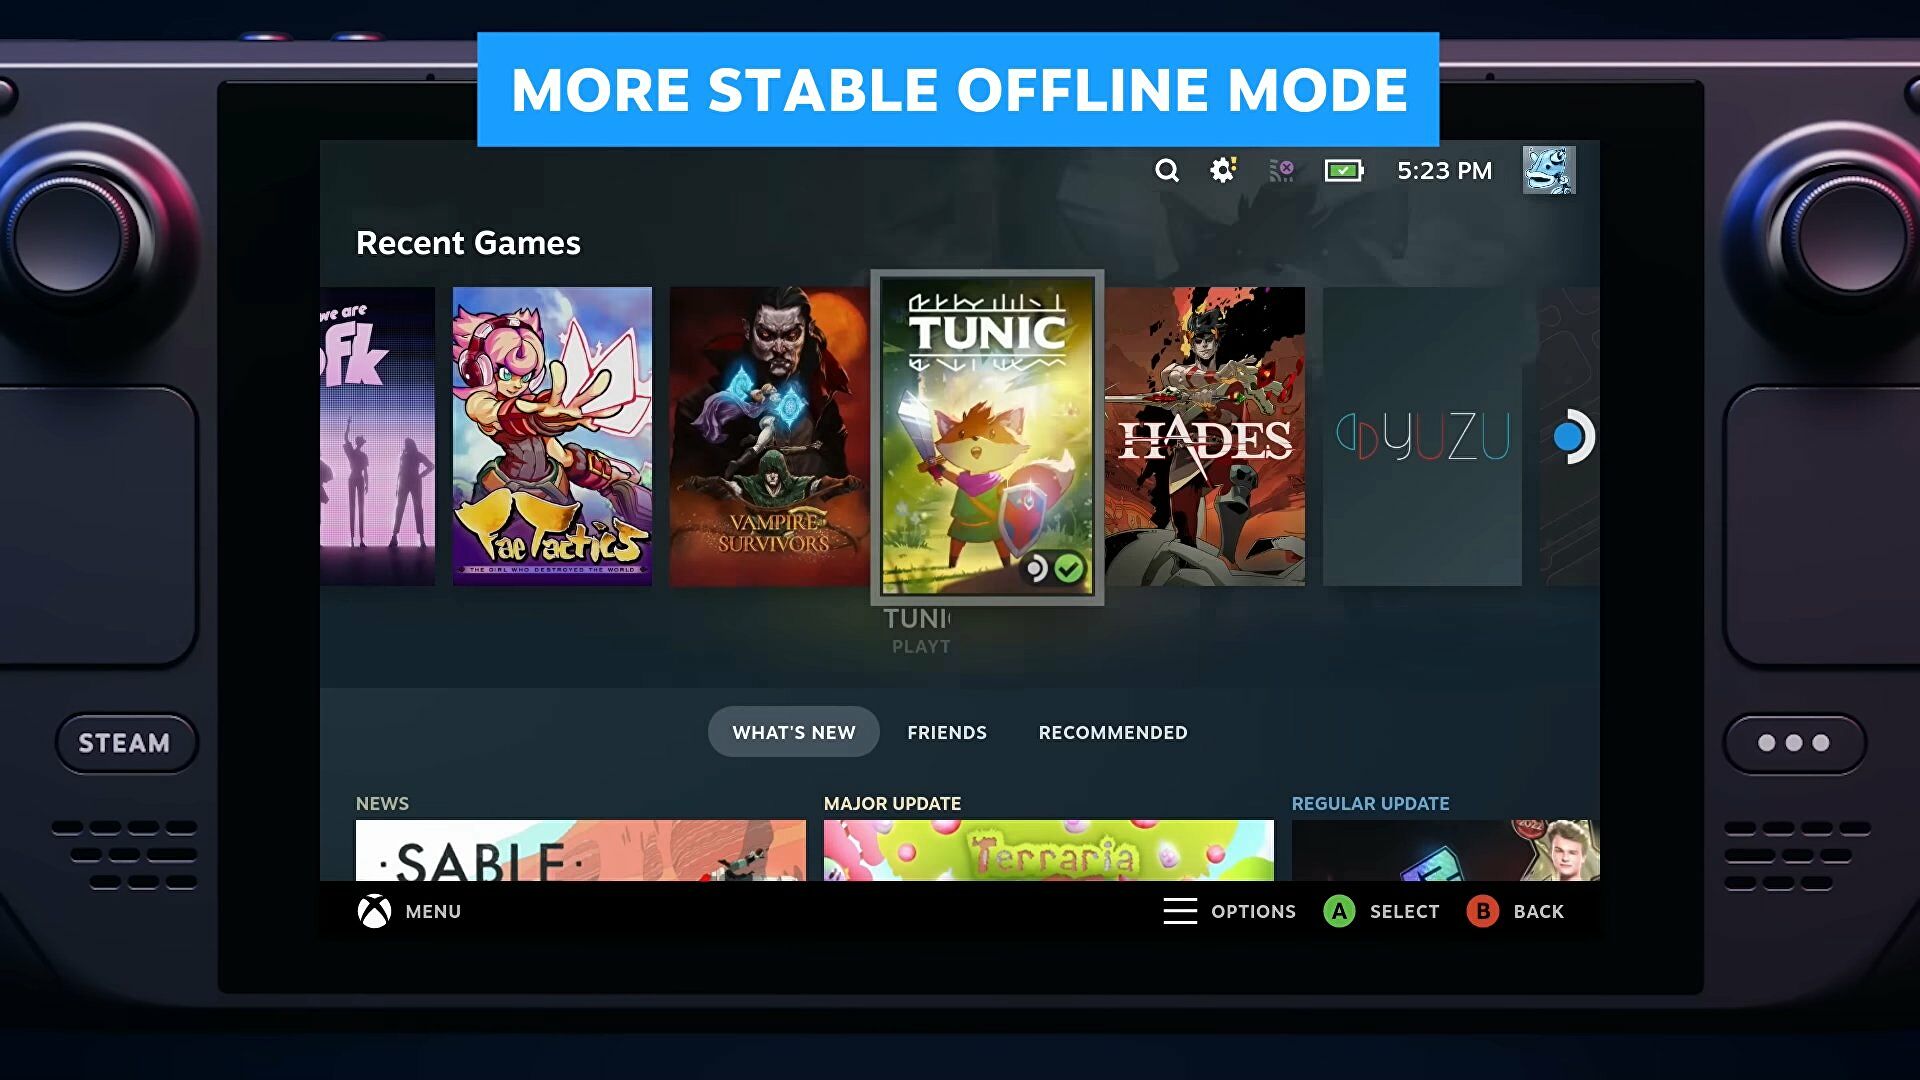 Valve showed a Nintendo Switch emulator in Steam Deck’s library during recent video